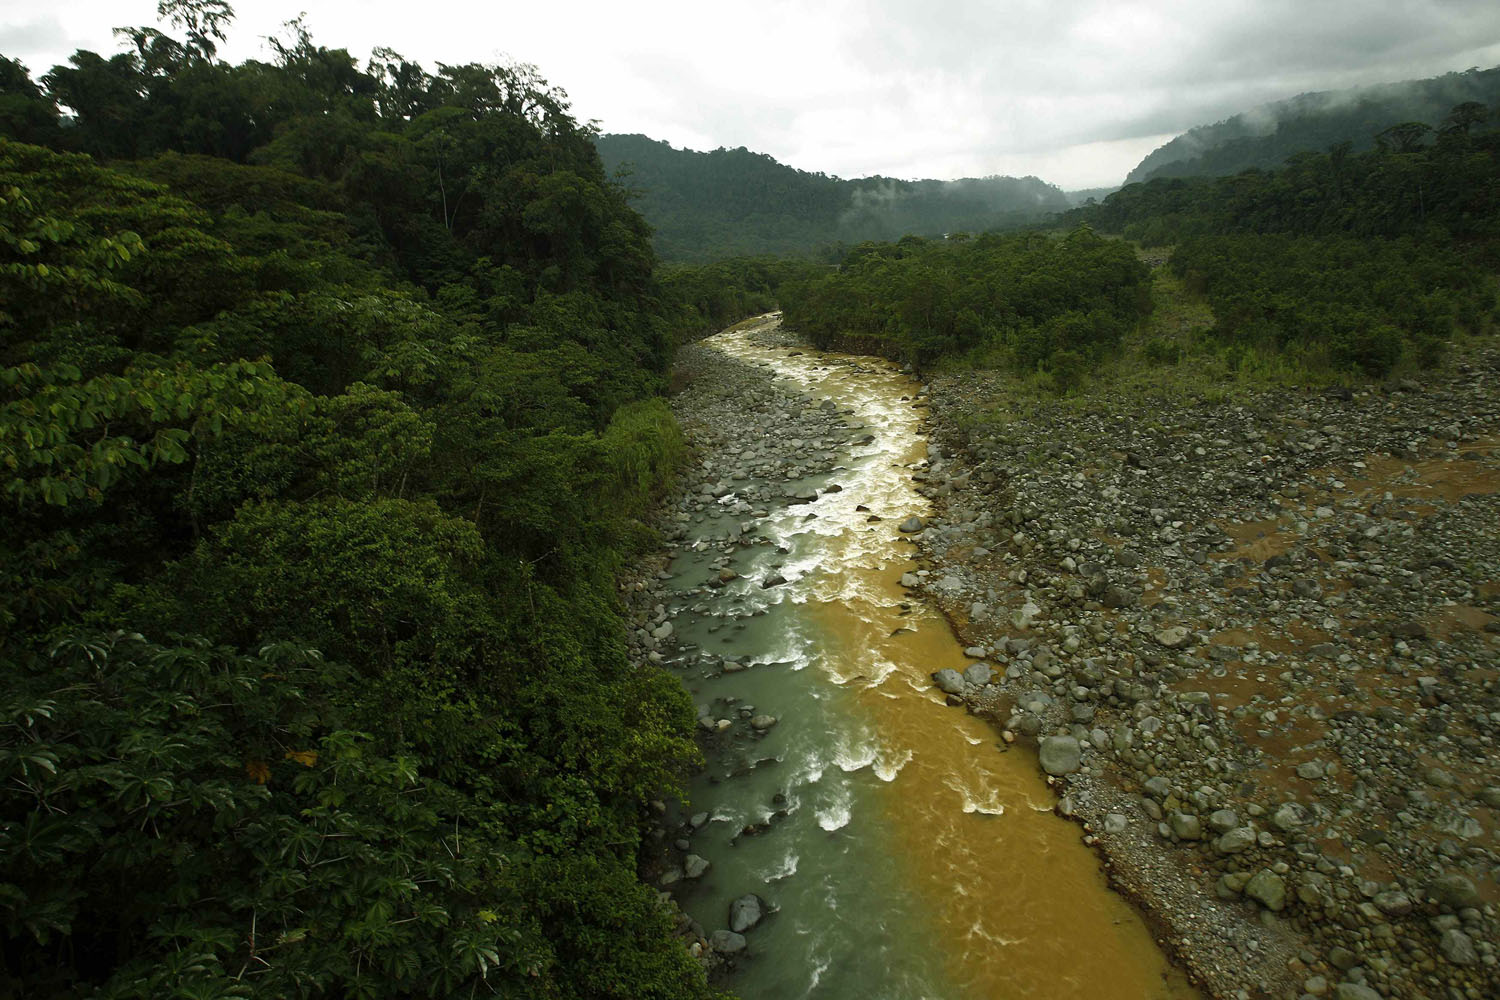 June 5, 2012. The Rio Sucio or  Dirty River,  where one branch is colored yellow/brown by the minerals it carries from the Irazu Volcano, is seen mixing with the clear waters filtered by the tropical rainforest in the Braullio Carrillo National Park, 50 km (31 miles) east of San Jose.